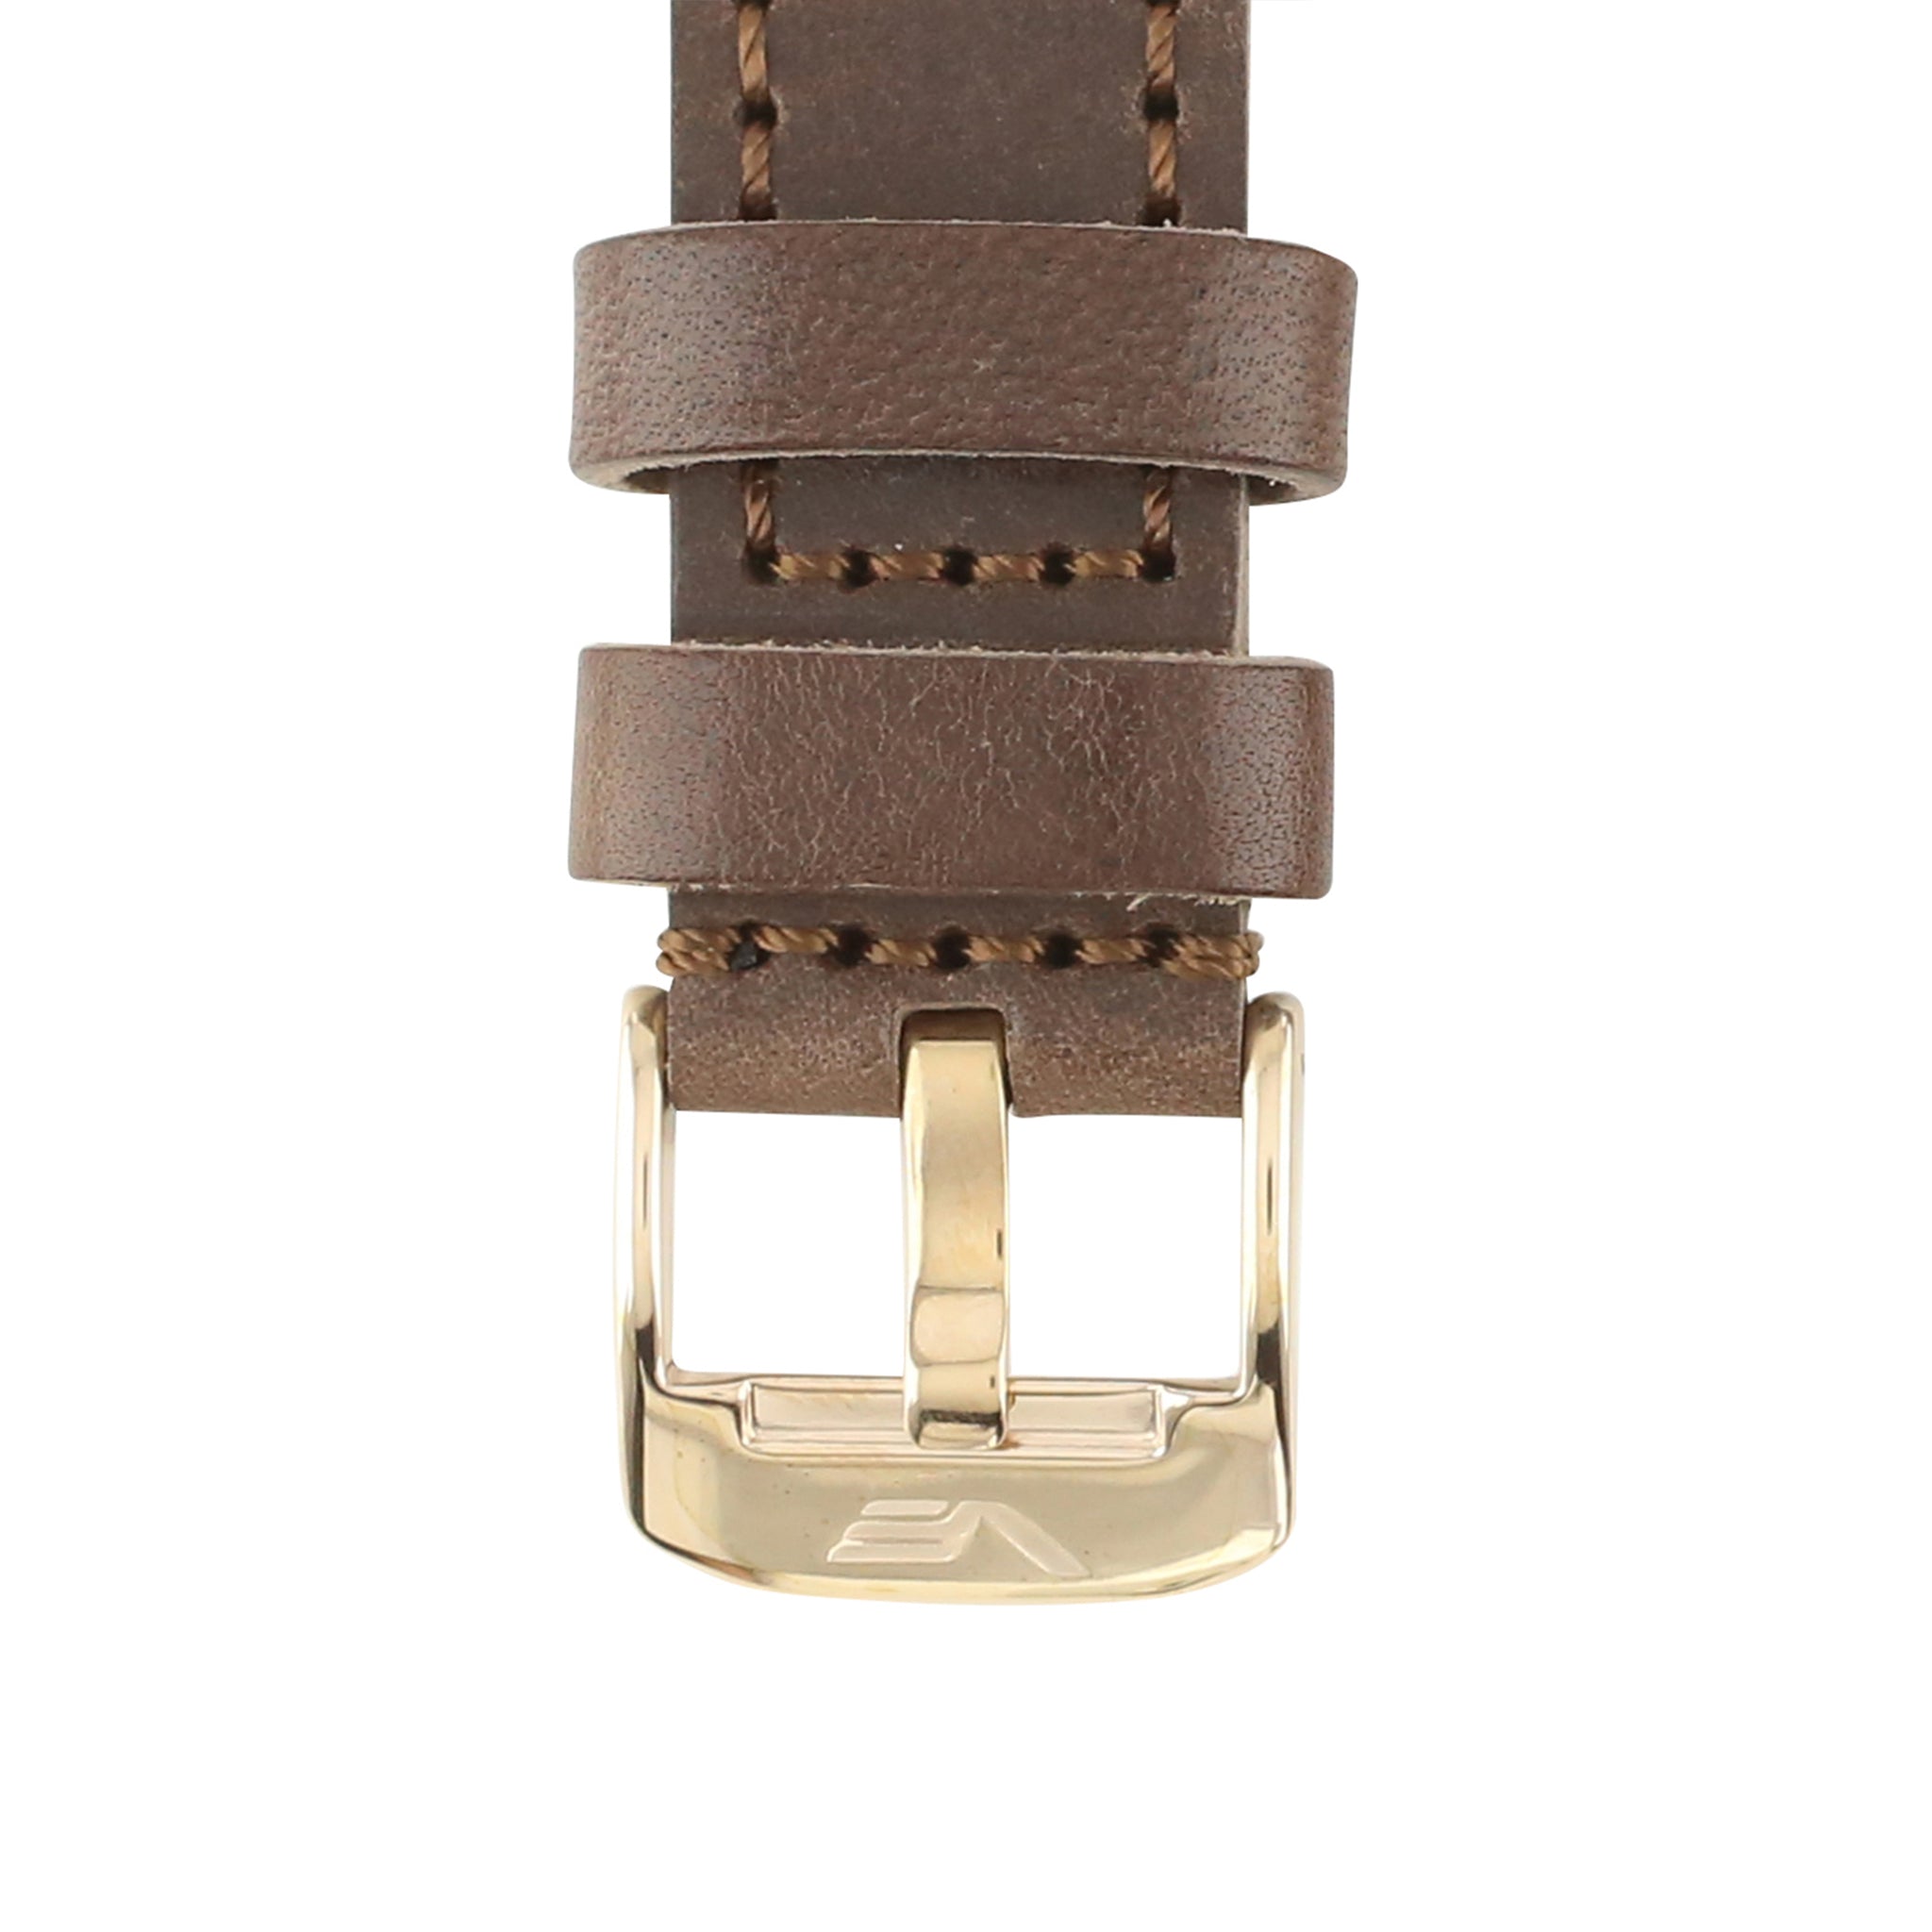 ALMAZ BROWN LEATHER STRAP 22mm - ROSE GOLD BUCKLE